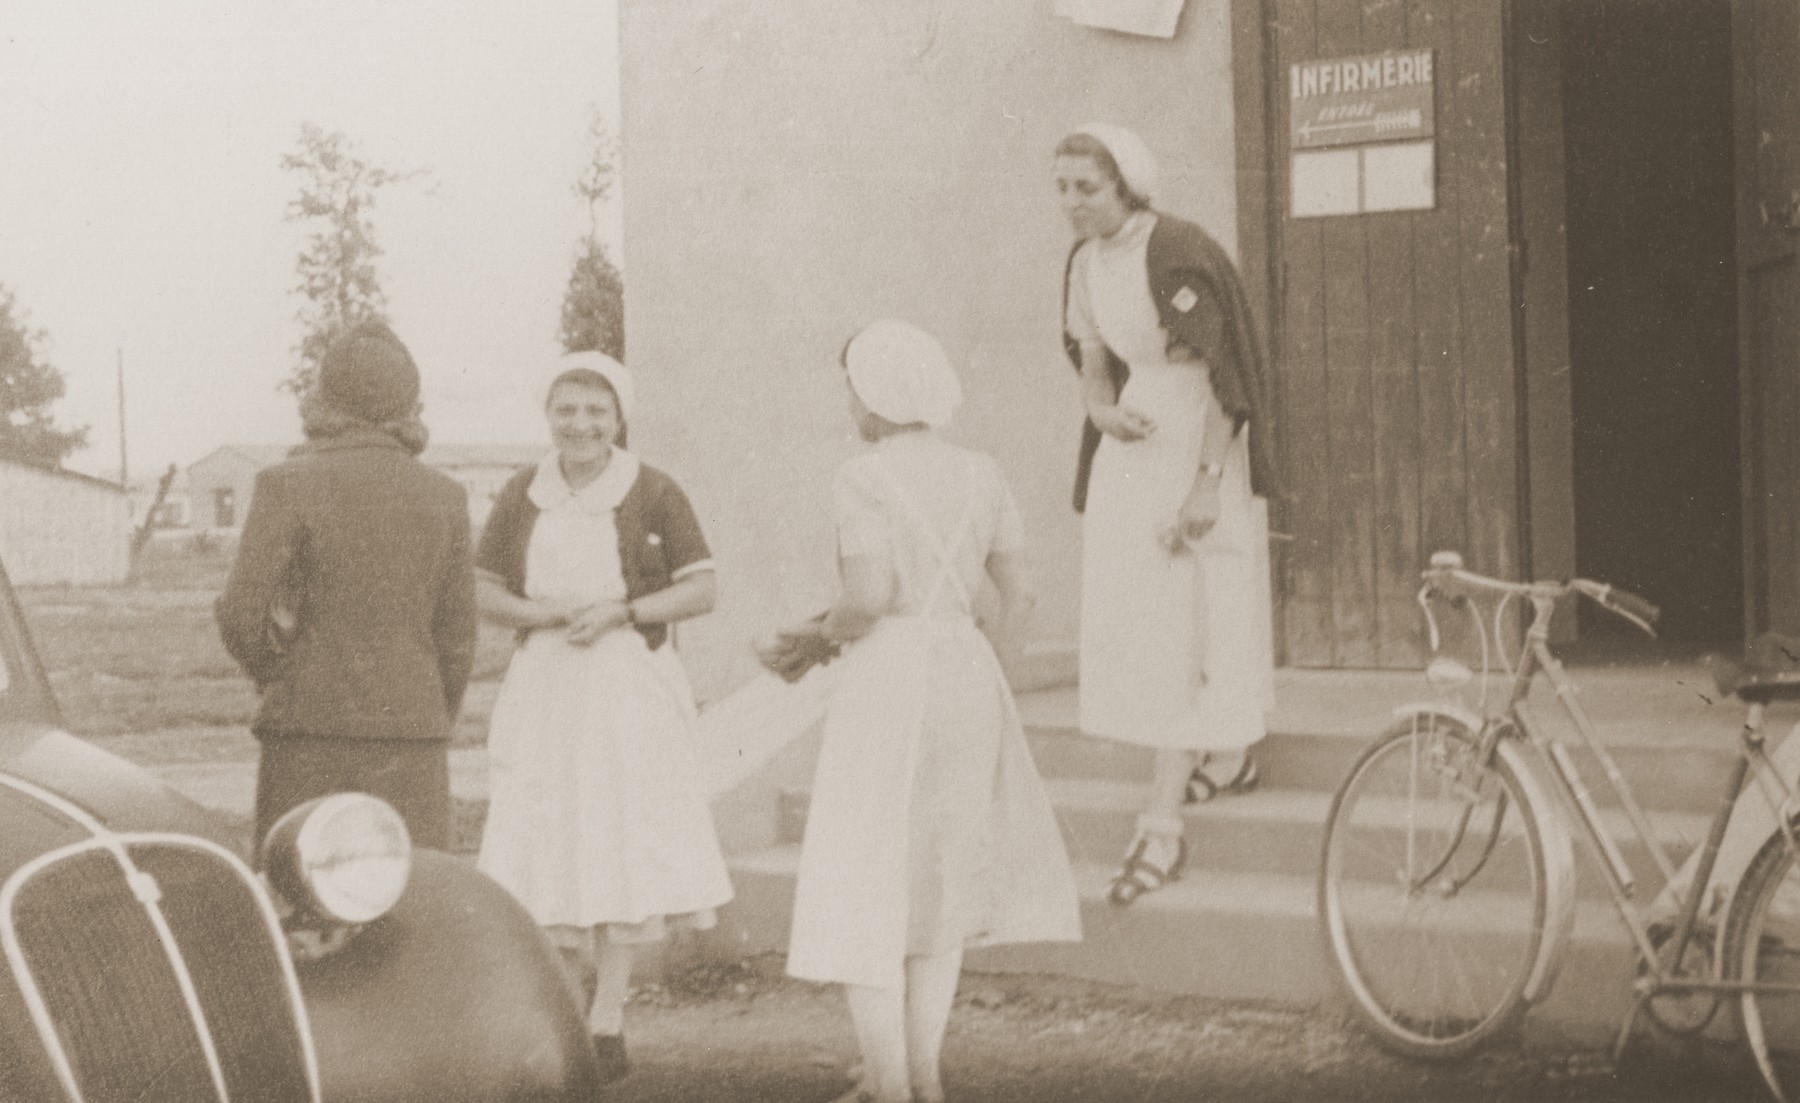 Nurses at the Recebedou camp infirmary. Second from the left is Isabelle Peloux, the aunt of Marie Genevieve Parmentier.

Marie Genevieve Parmentier was a ten year-old French girl living in Paris at the time of the German occupation in 1940. Her widowed mother sent her to safety with an old relative in Ariège in the South of France. She sooned joined her aunt, Isabelle Peloux, a military nurse, at the camp of Recebedou. While there she attended primary school at nearby Portet-sur-Garonne, before returning to her family in the summer of 1941.